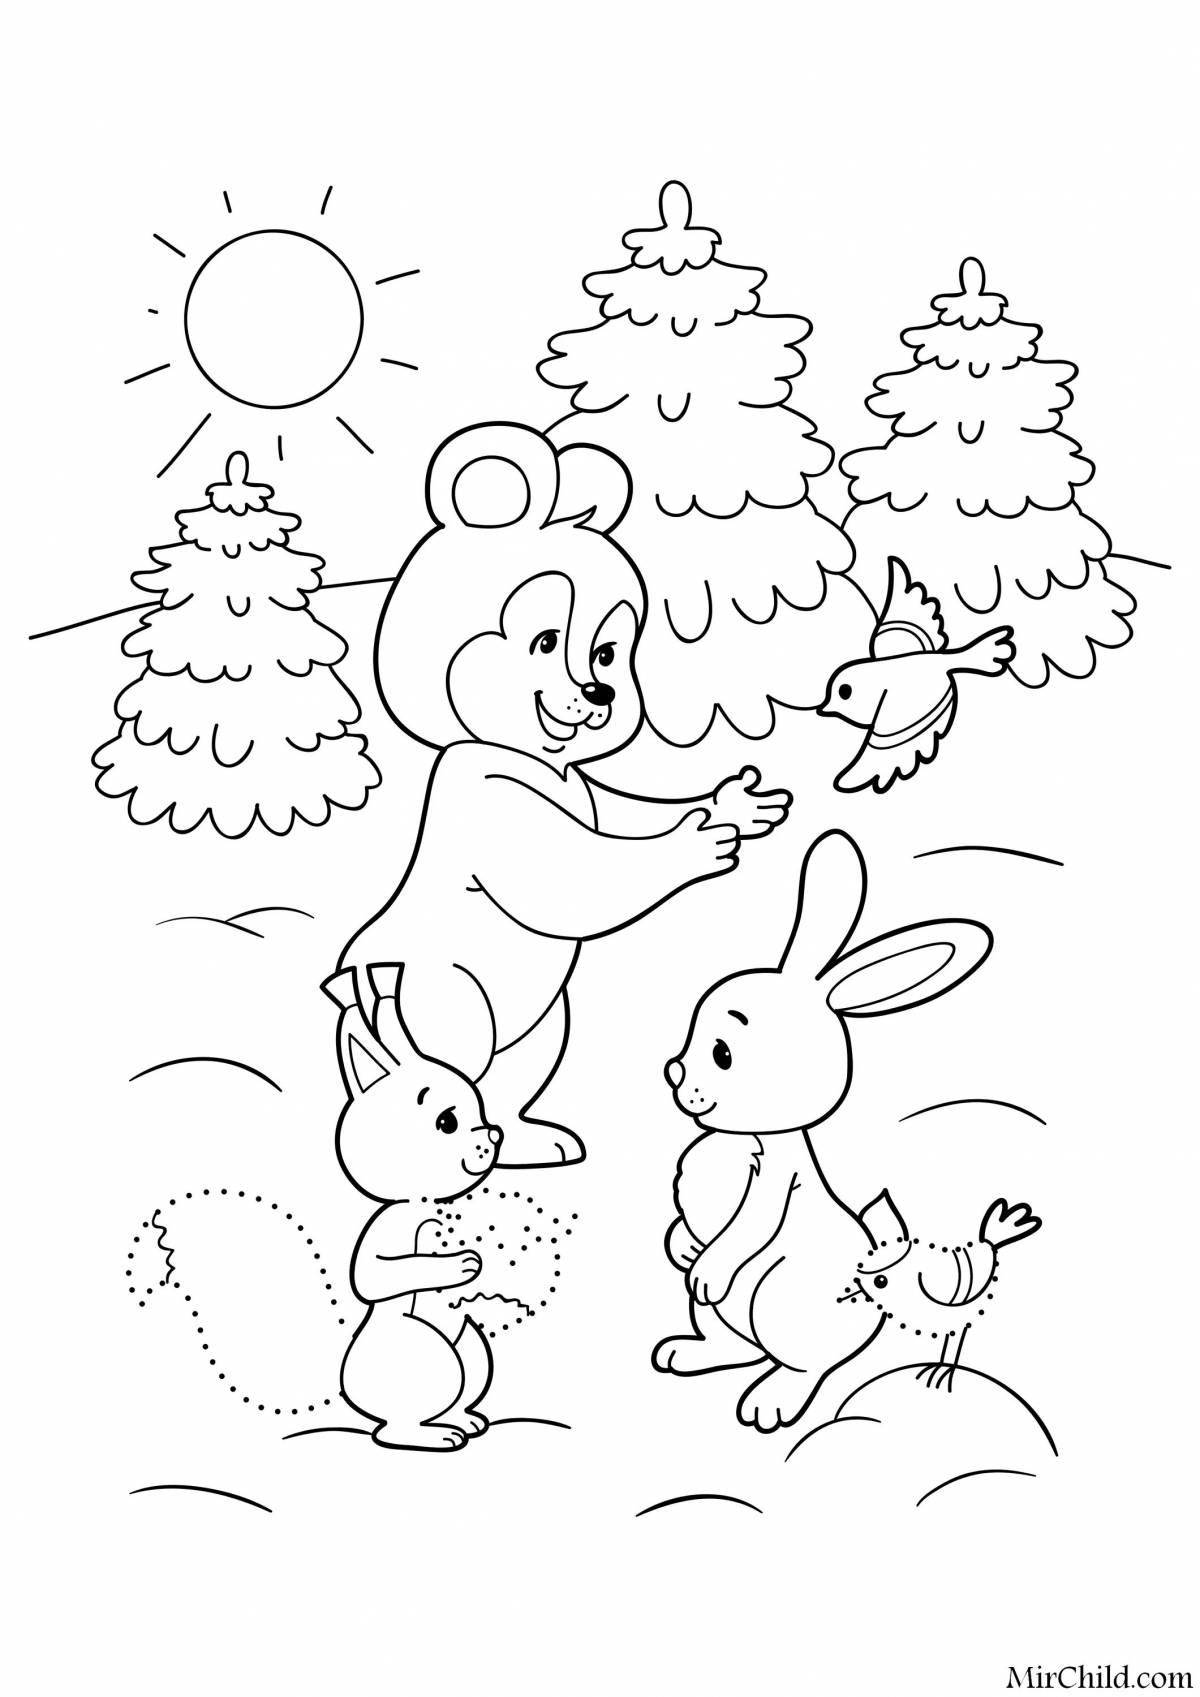 Coloring book exotic bear and hare